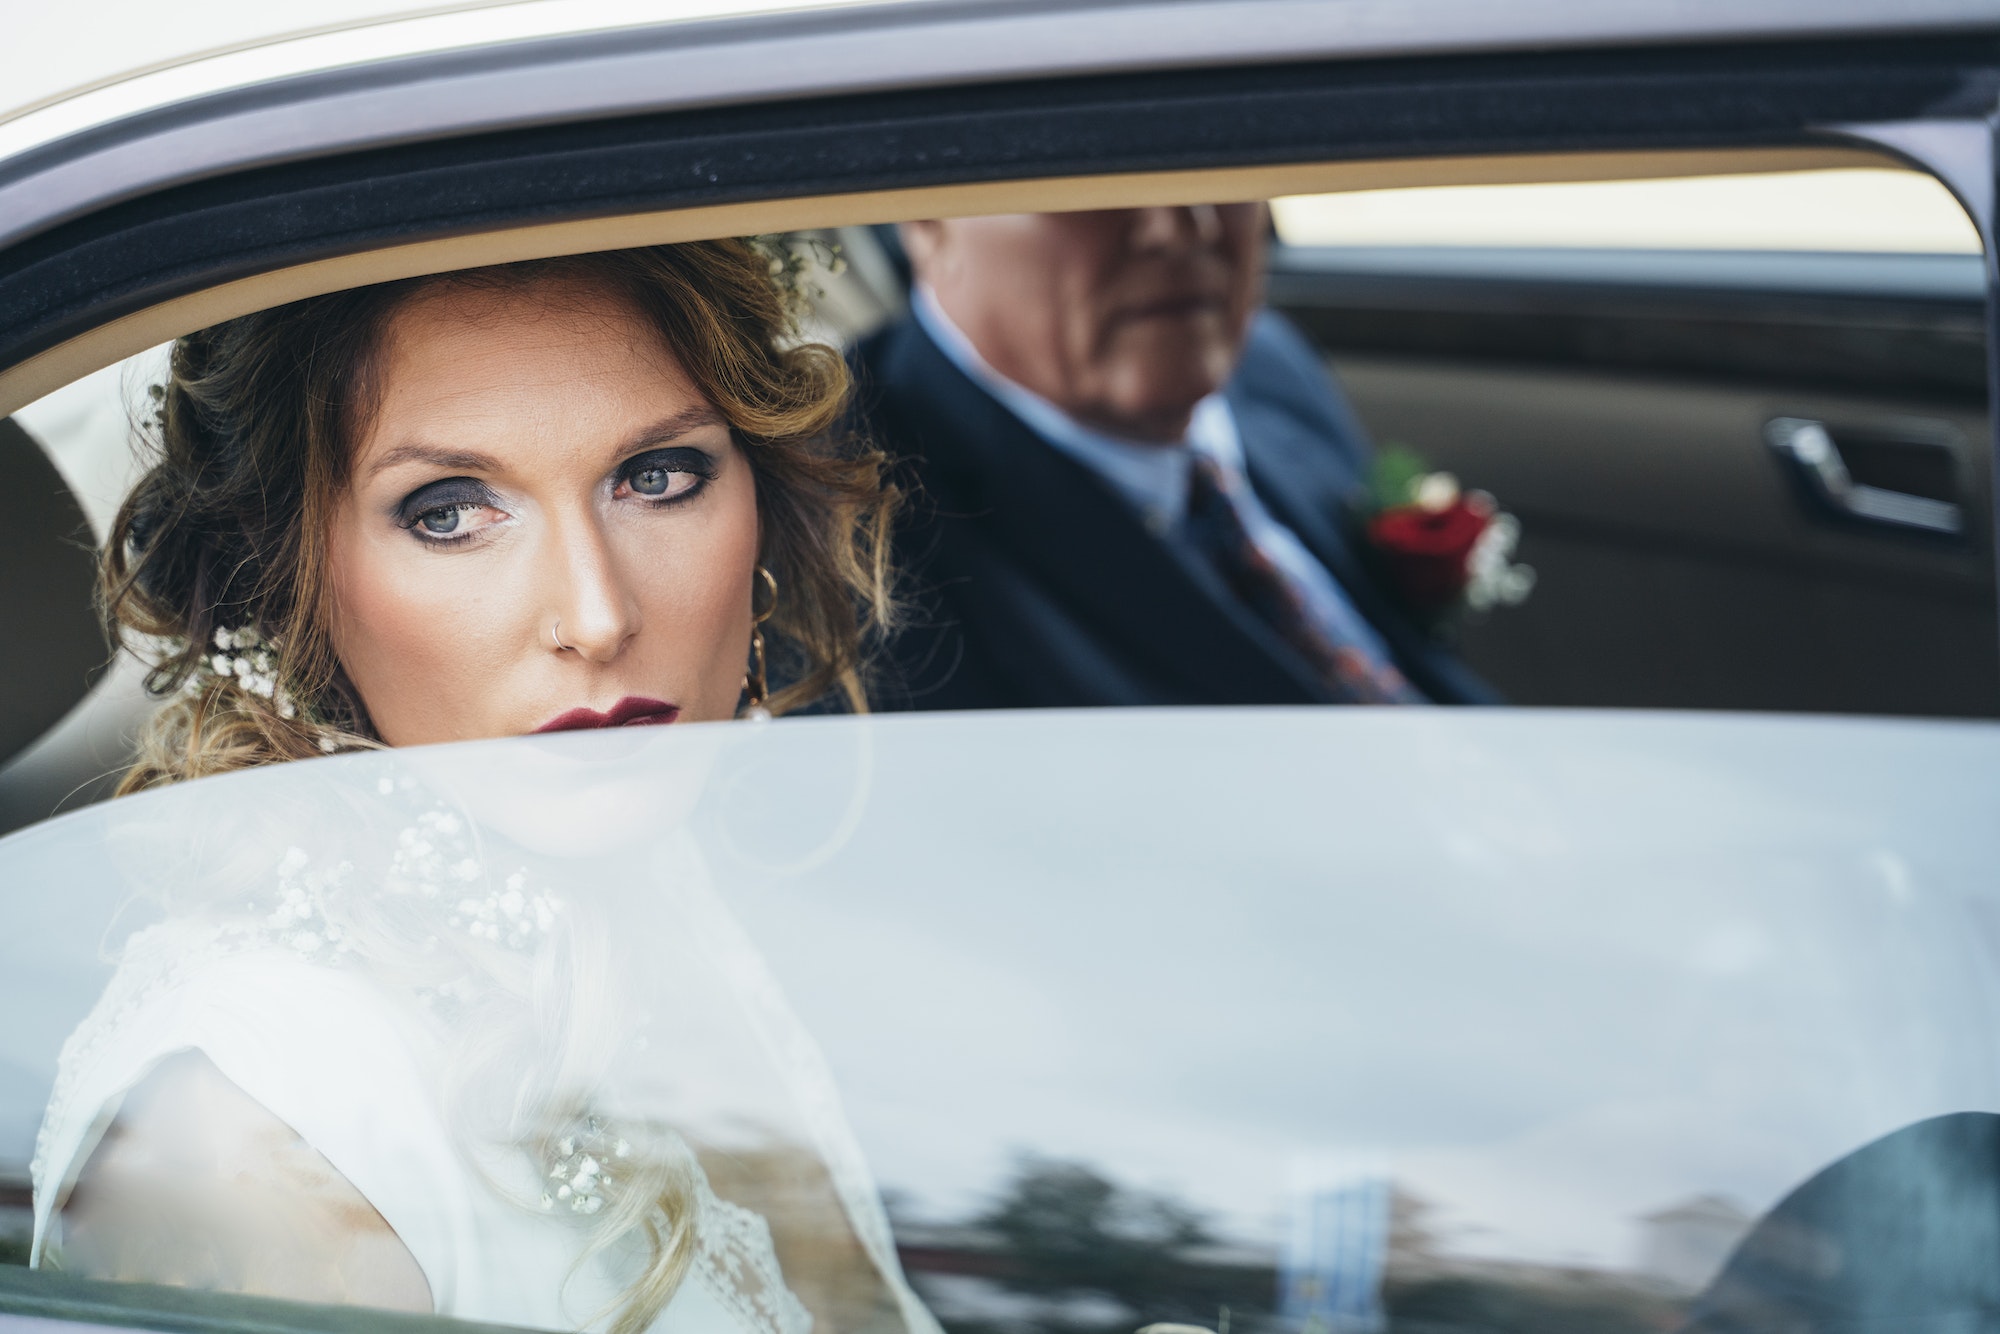 the bride arriving to the wedding by car.